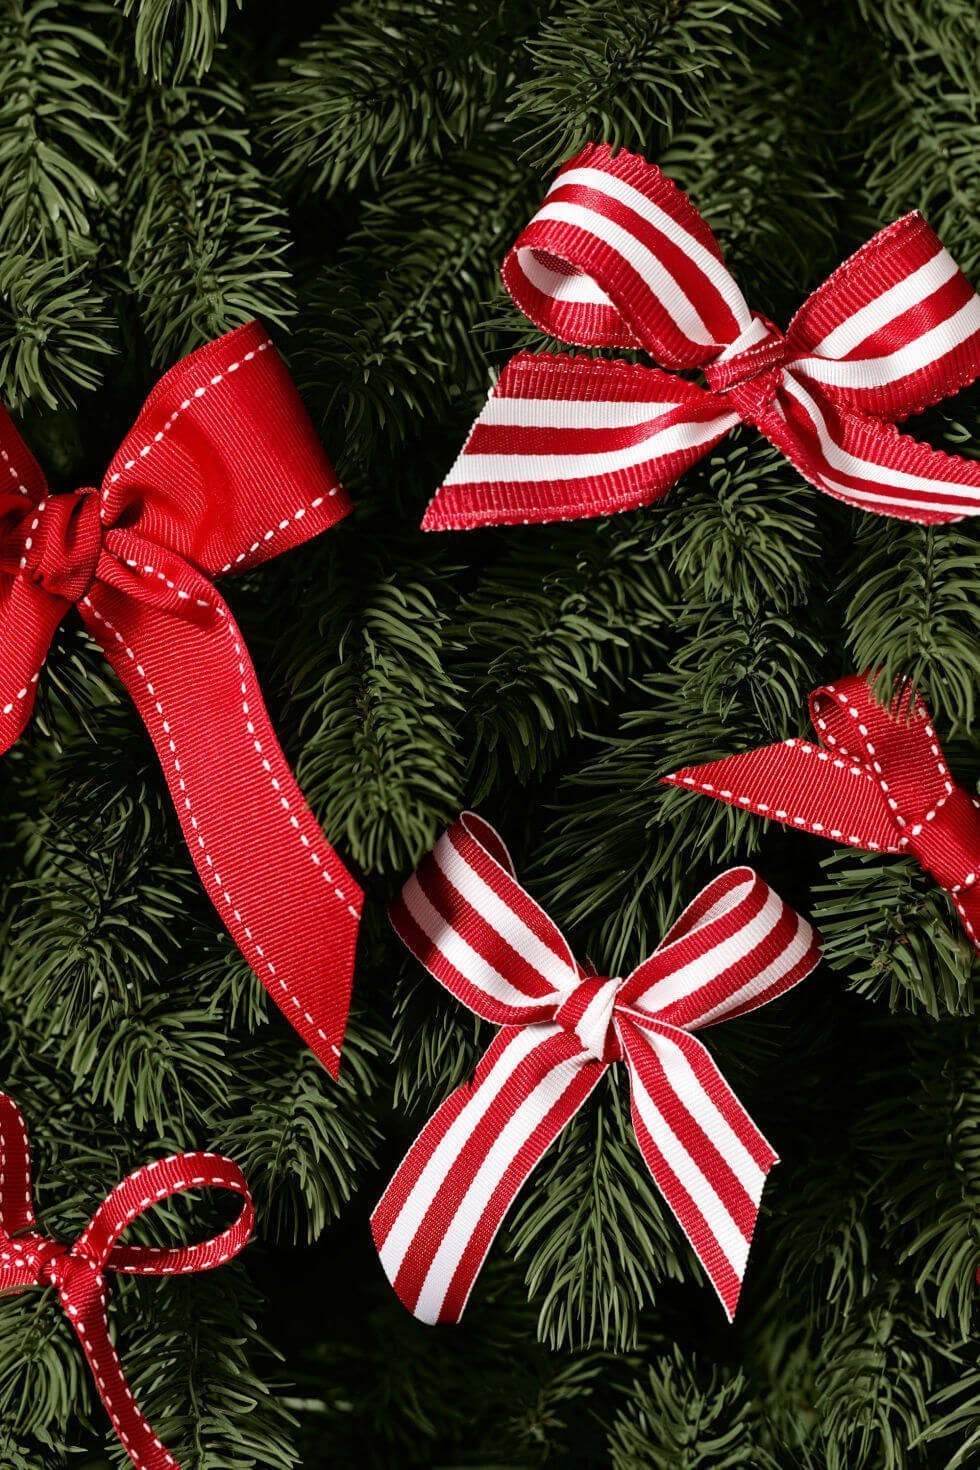 Trim Your Tree in Candy-striped Bows